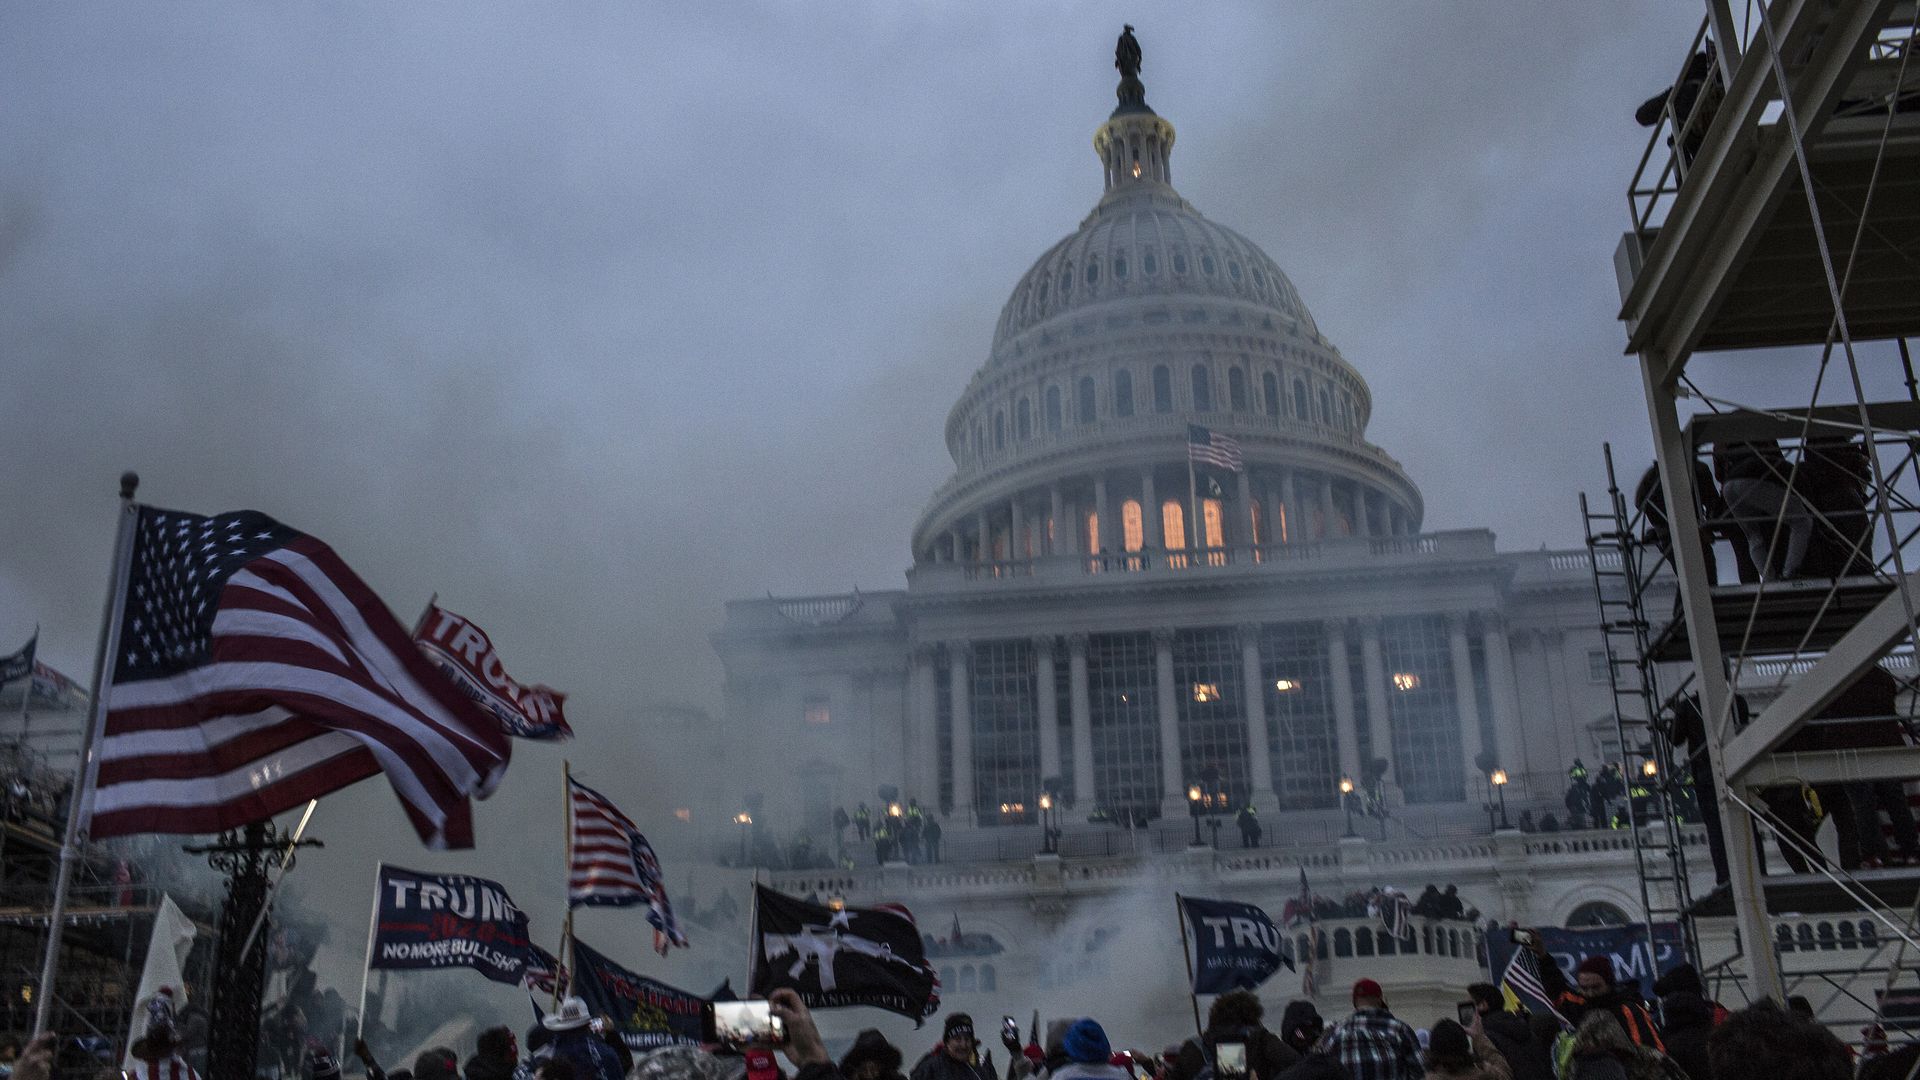 Security forces respond with tear gas after the US President Donald Trump's supporters breached the US Capitol security. 